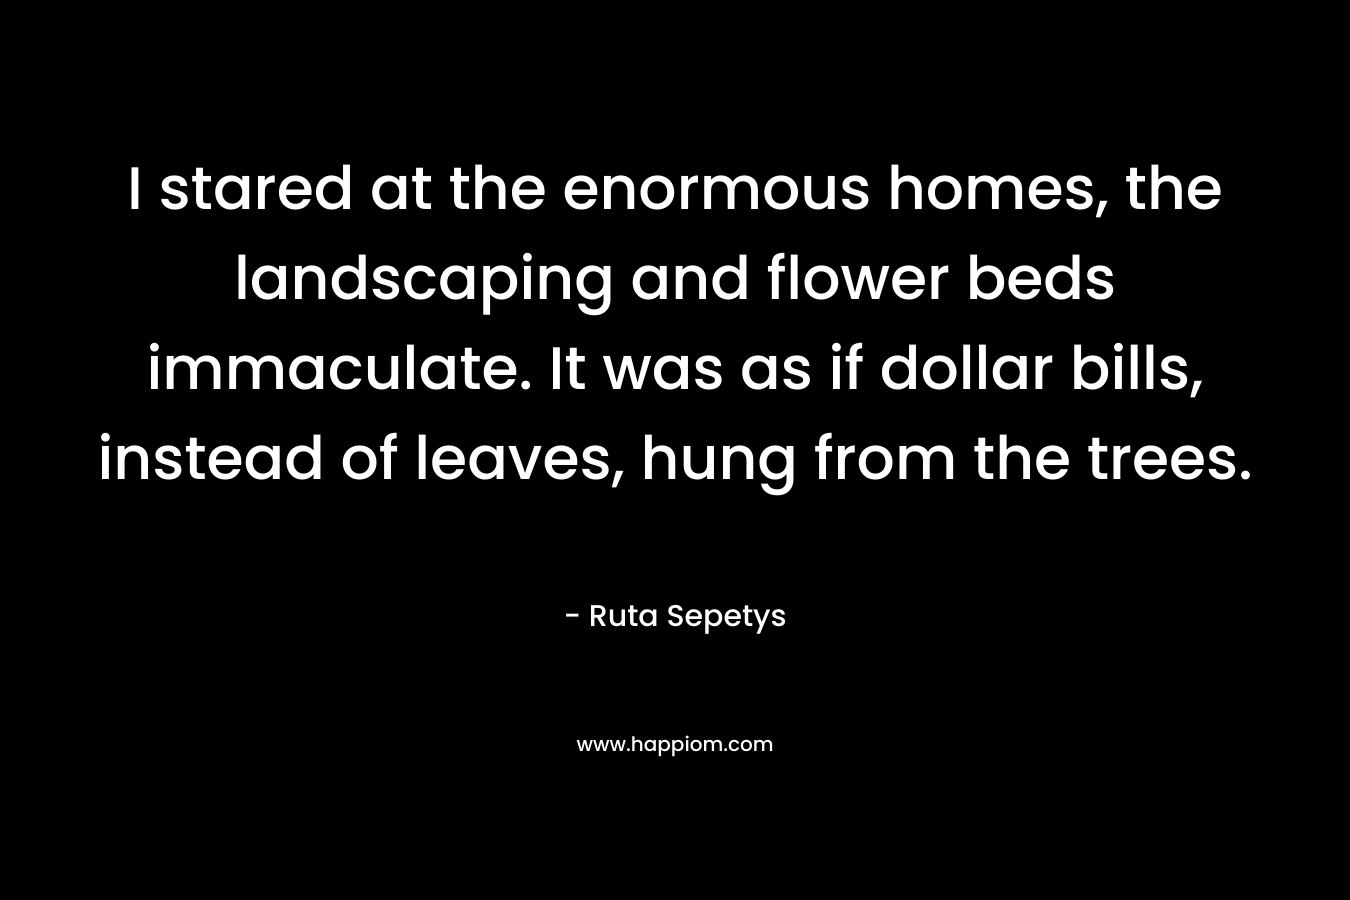 I stared at the enormous homes, the landscaping and flower beds immaculate. It was as if dollar bills, instead of leaves, hung from the trees.